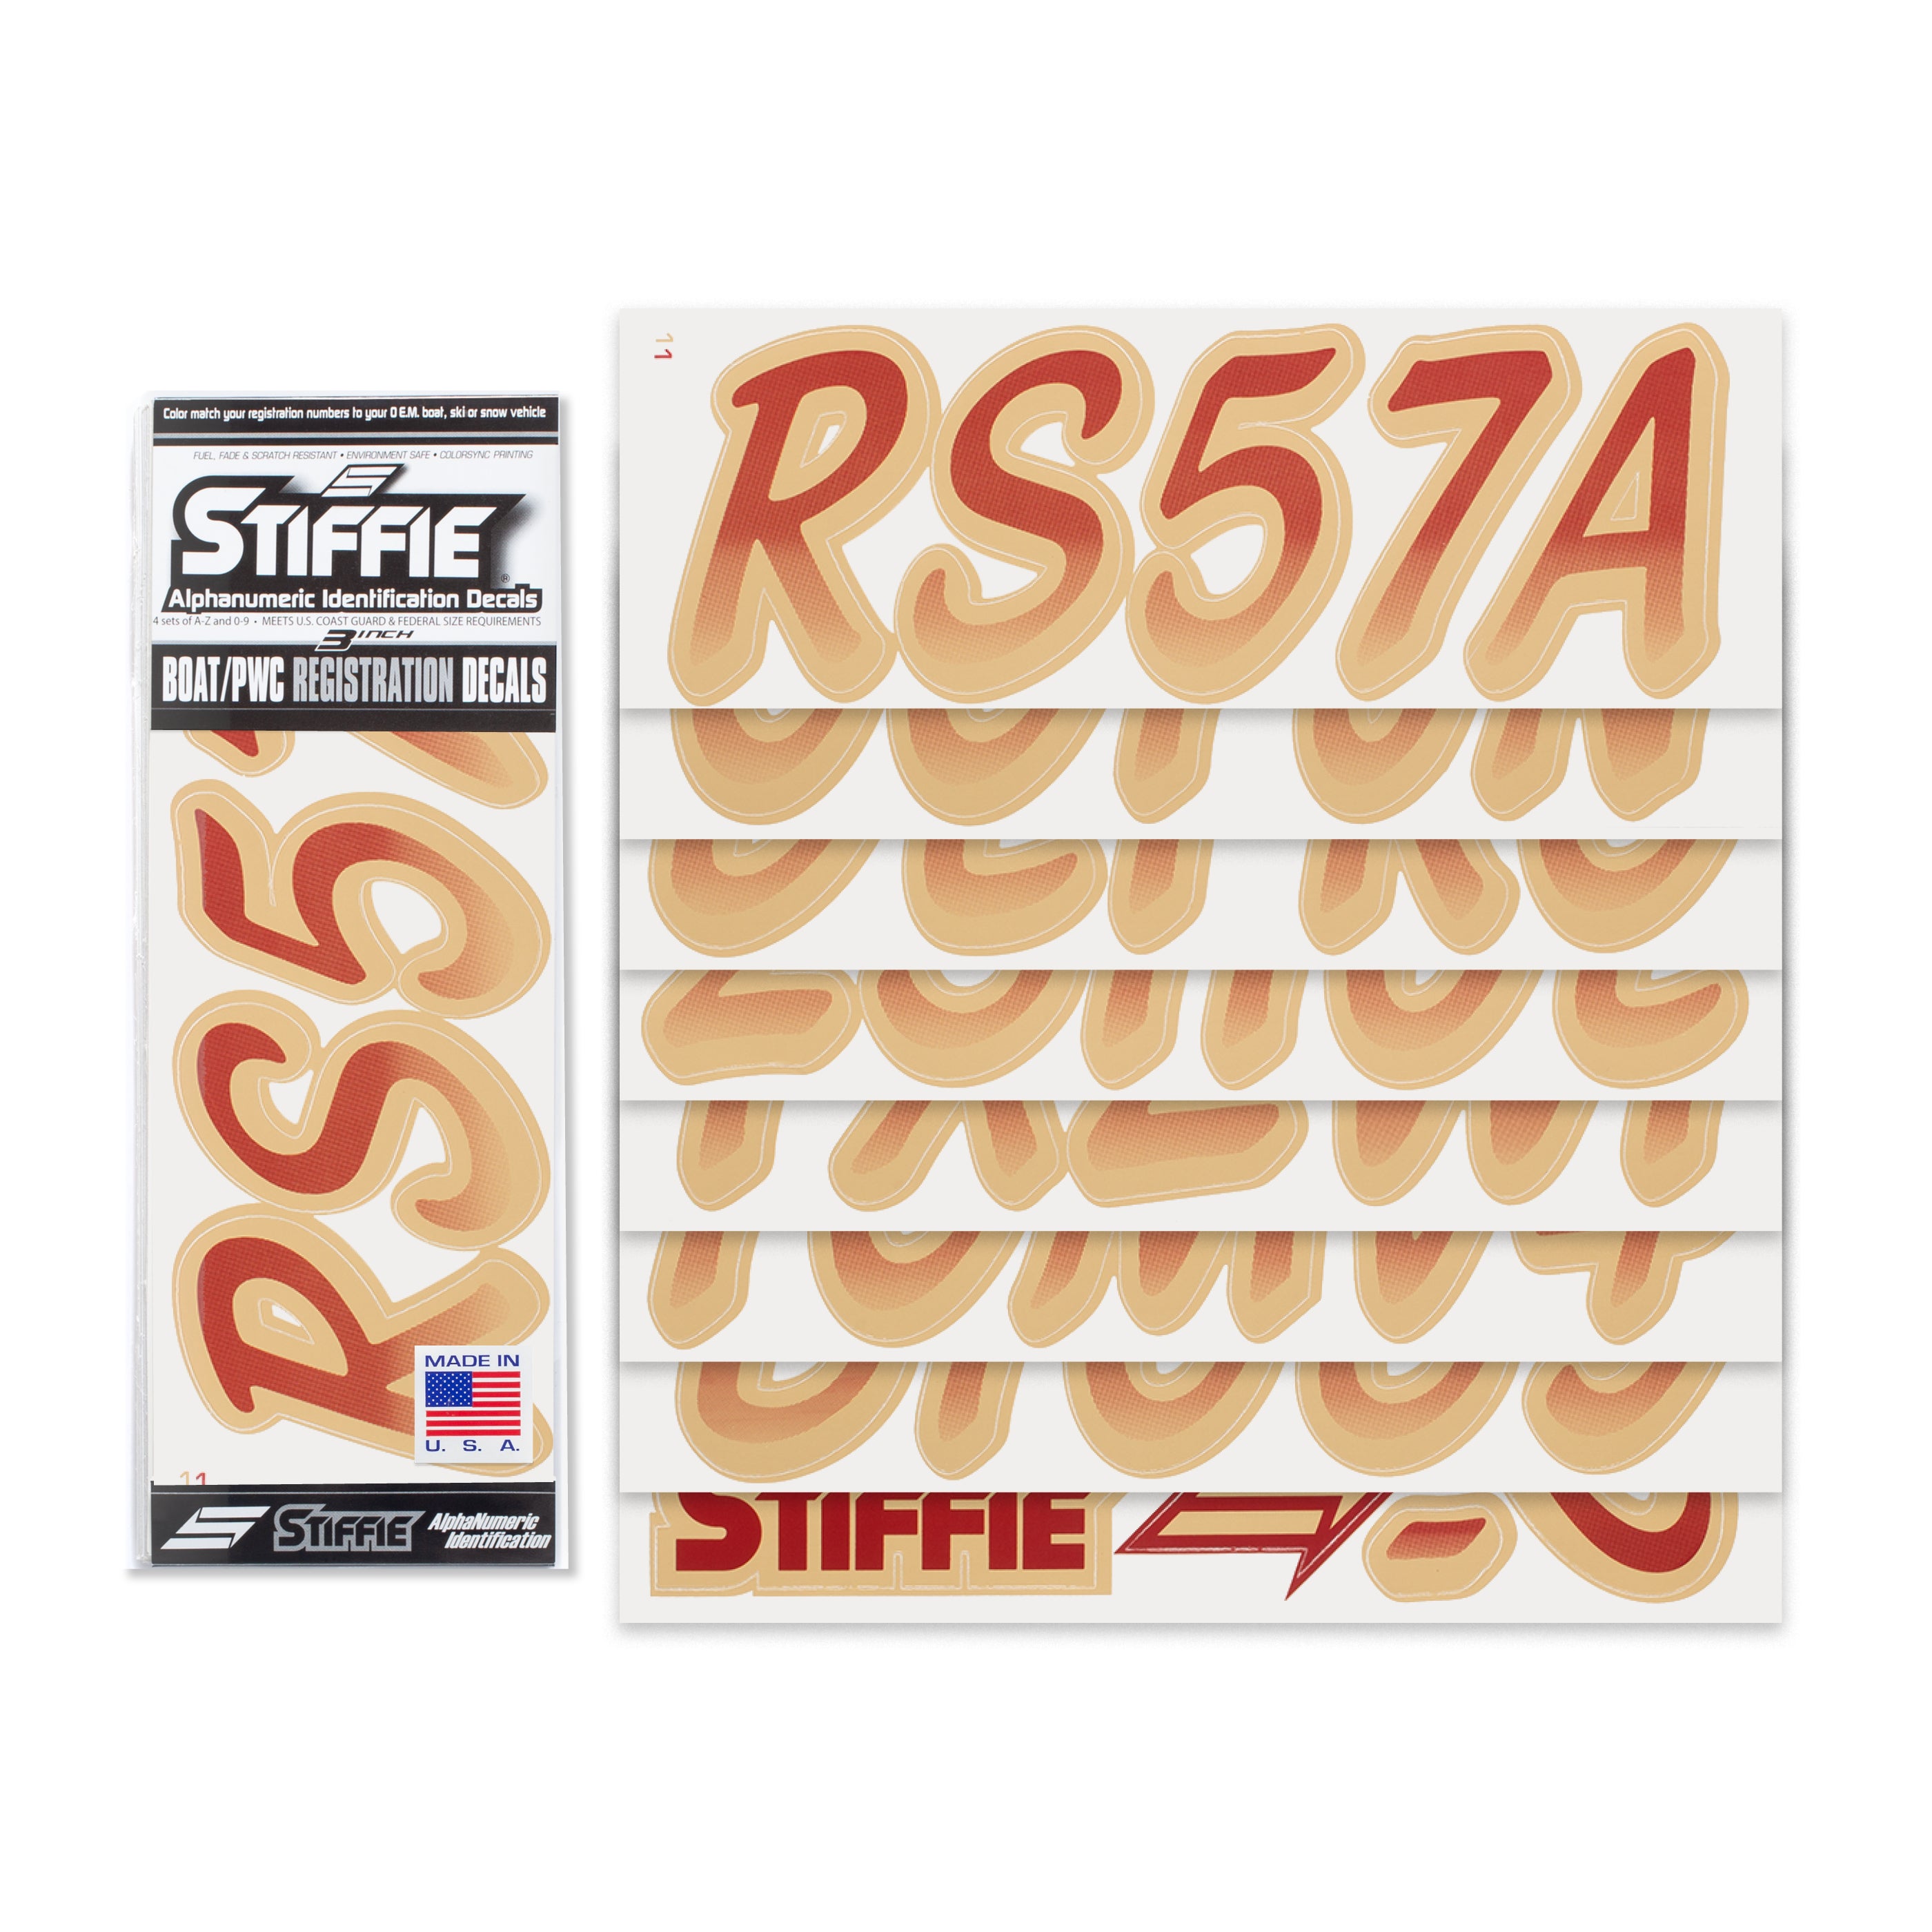 Stiffie Whipline Burgundy/Tan 3" Alpha-Numeric Registration Identification Numbers Stickers Decals for Boats & Personal Watercraft